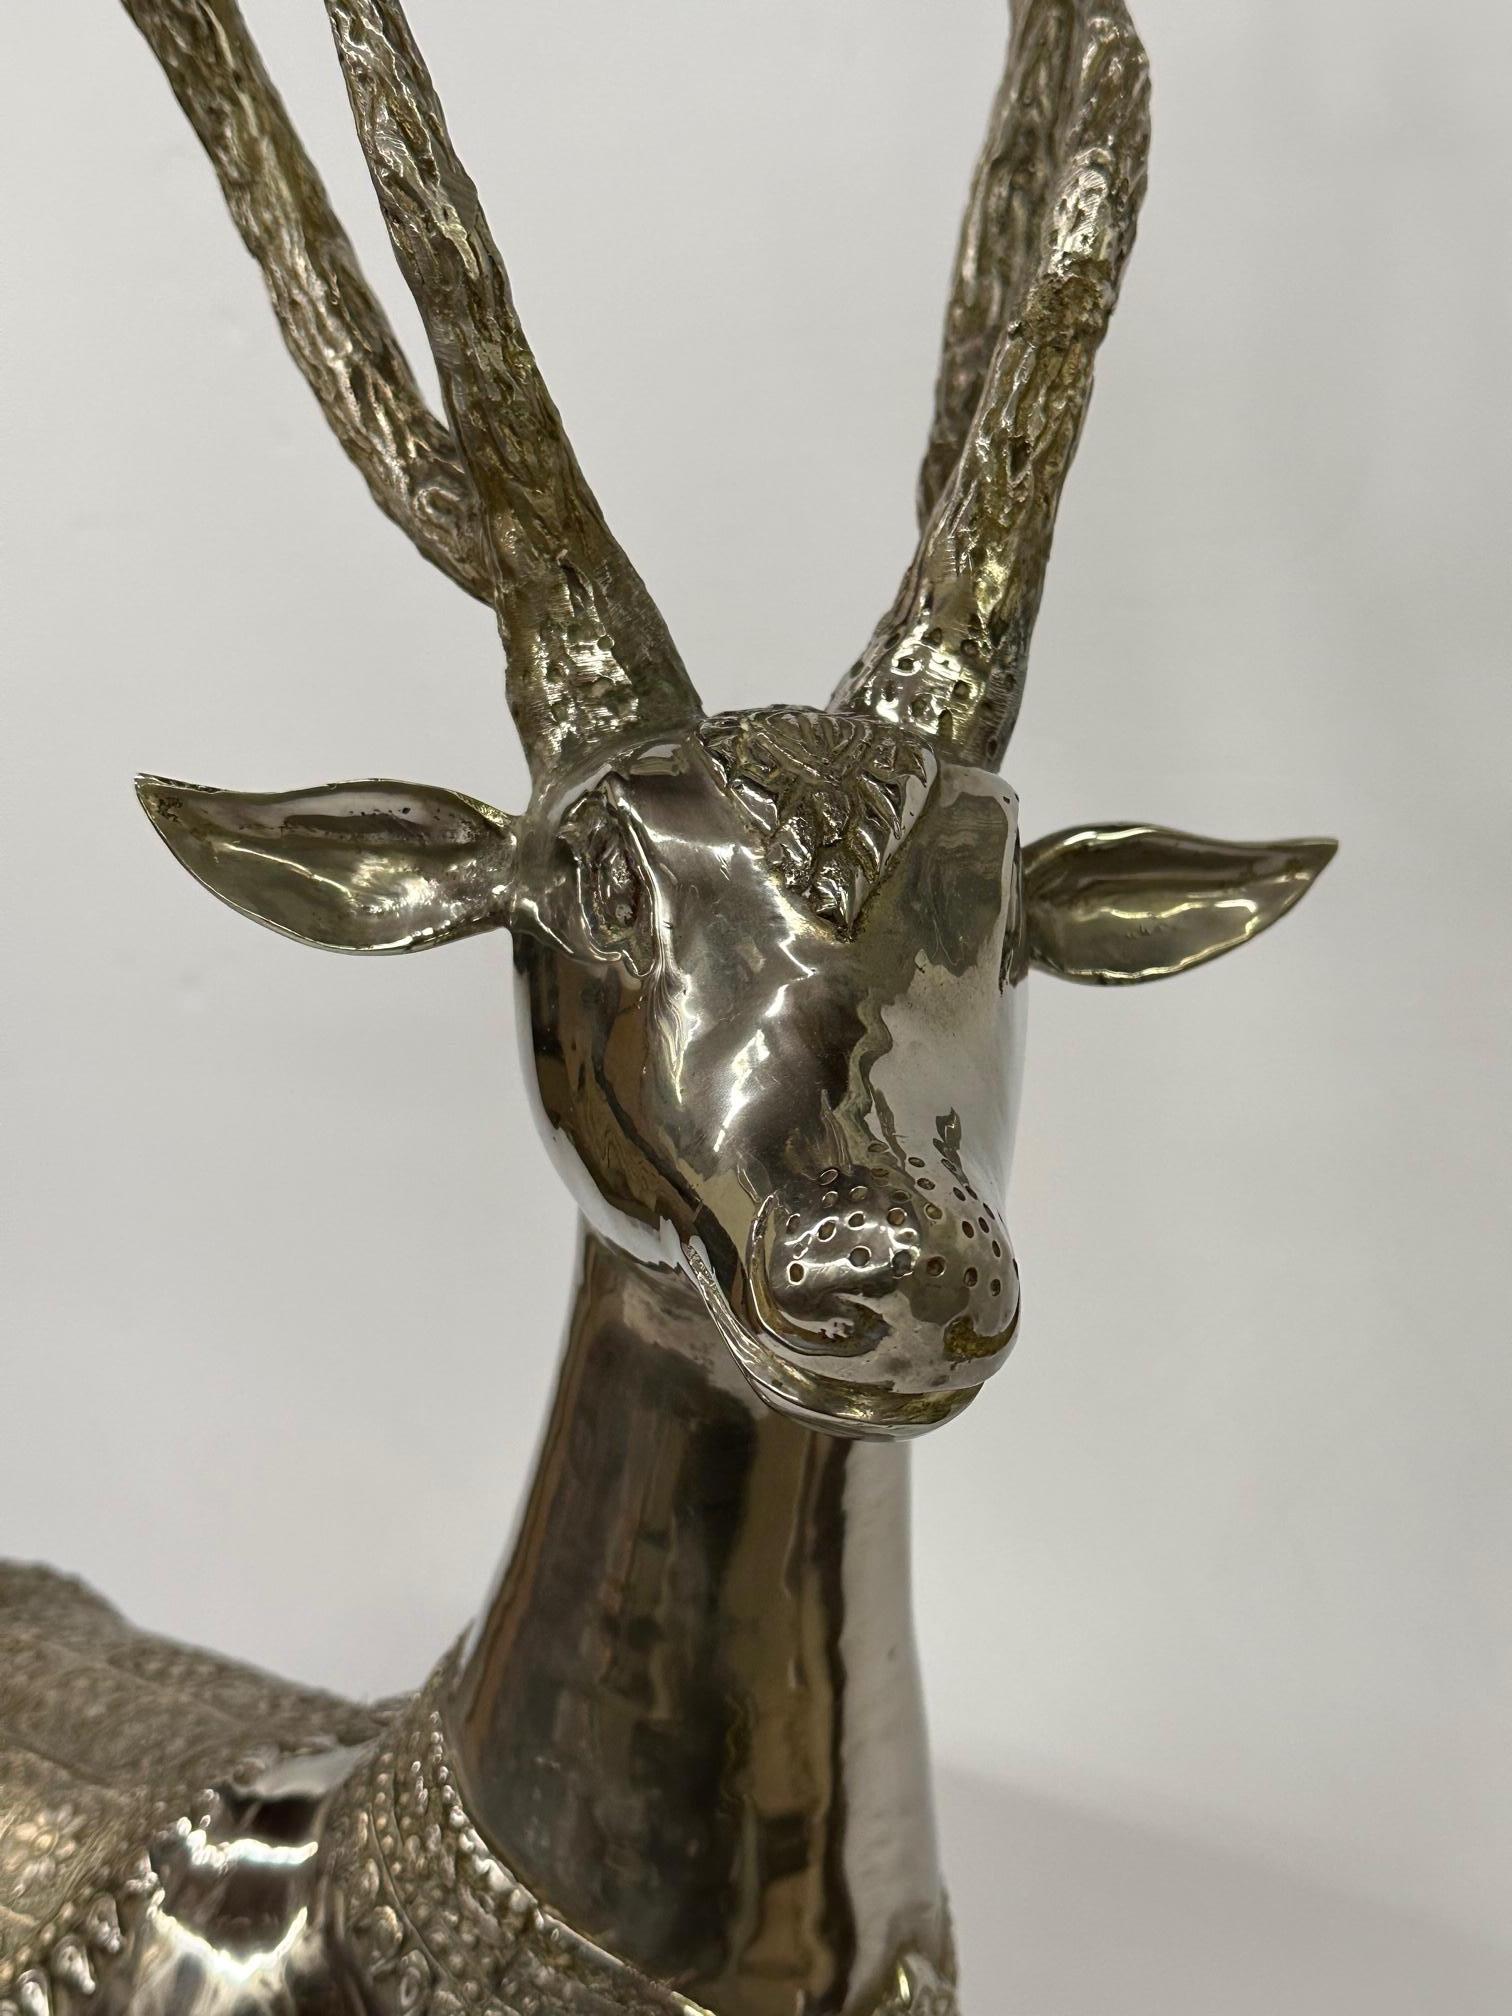 Meticulously detailed large and impressive nickel plated brass standing deer sculpture.